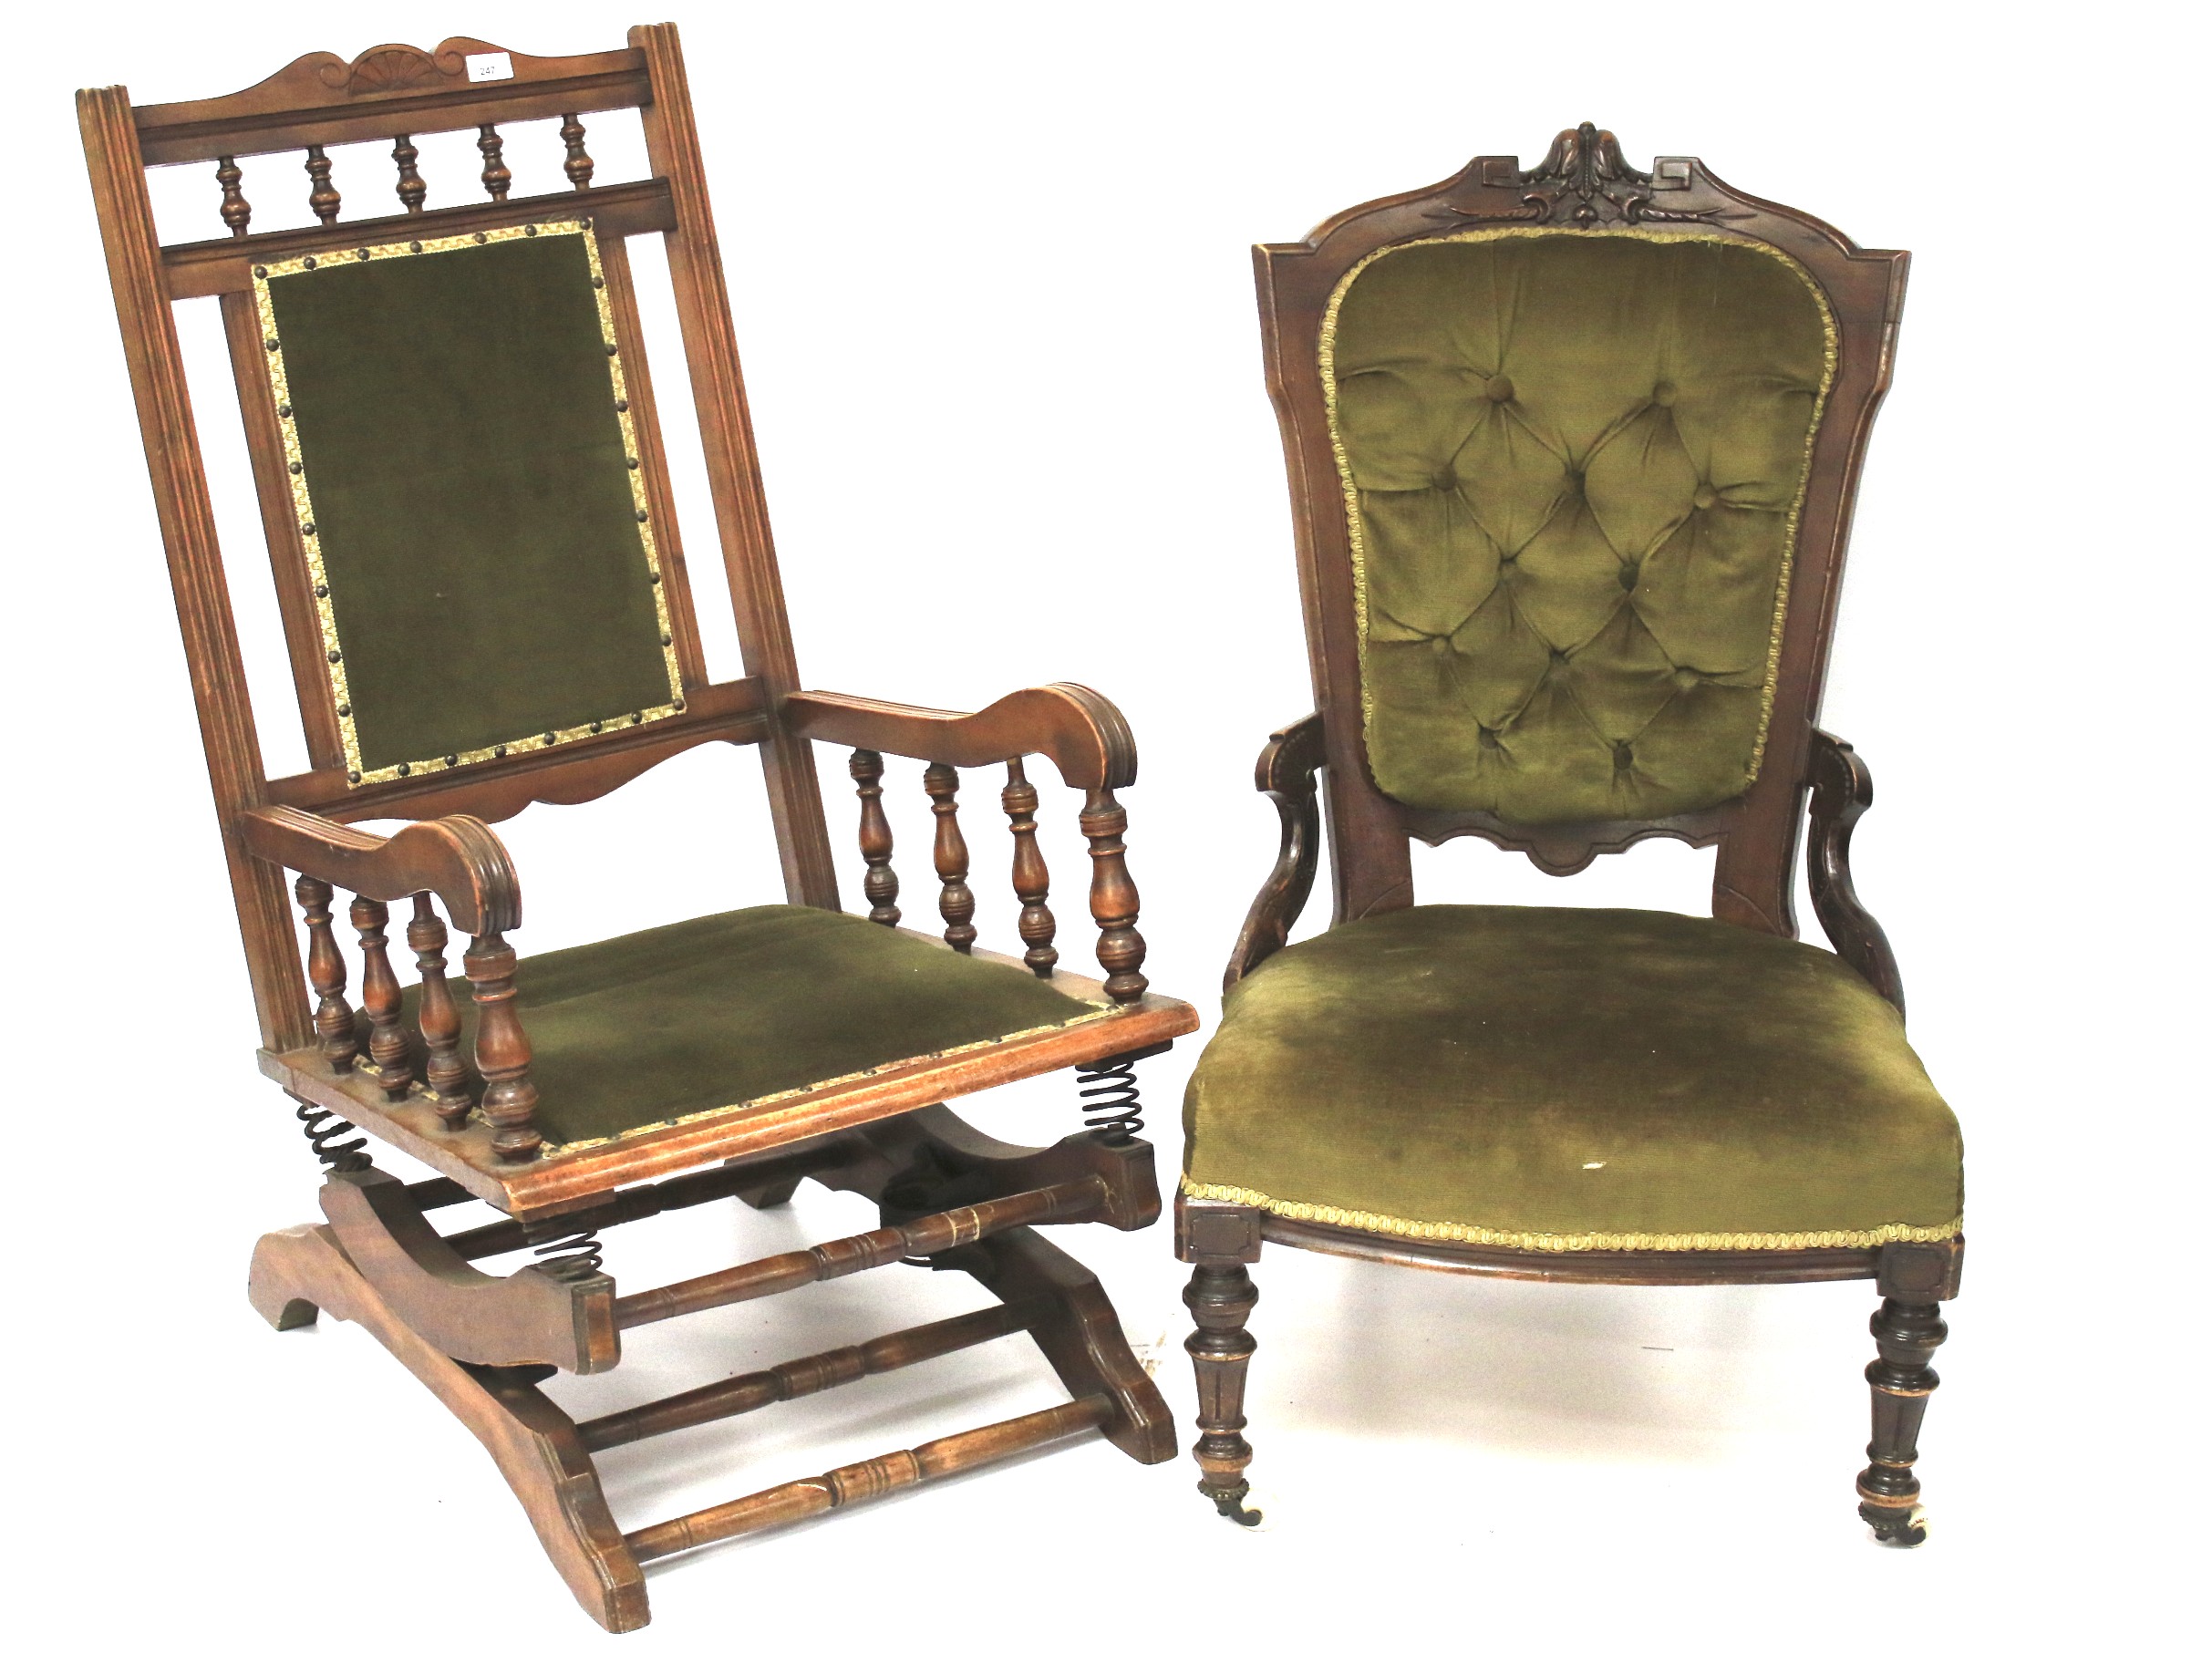 Two early 20th century mahogany chairs.